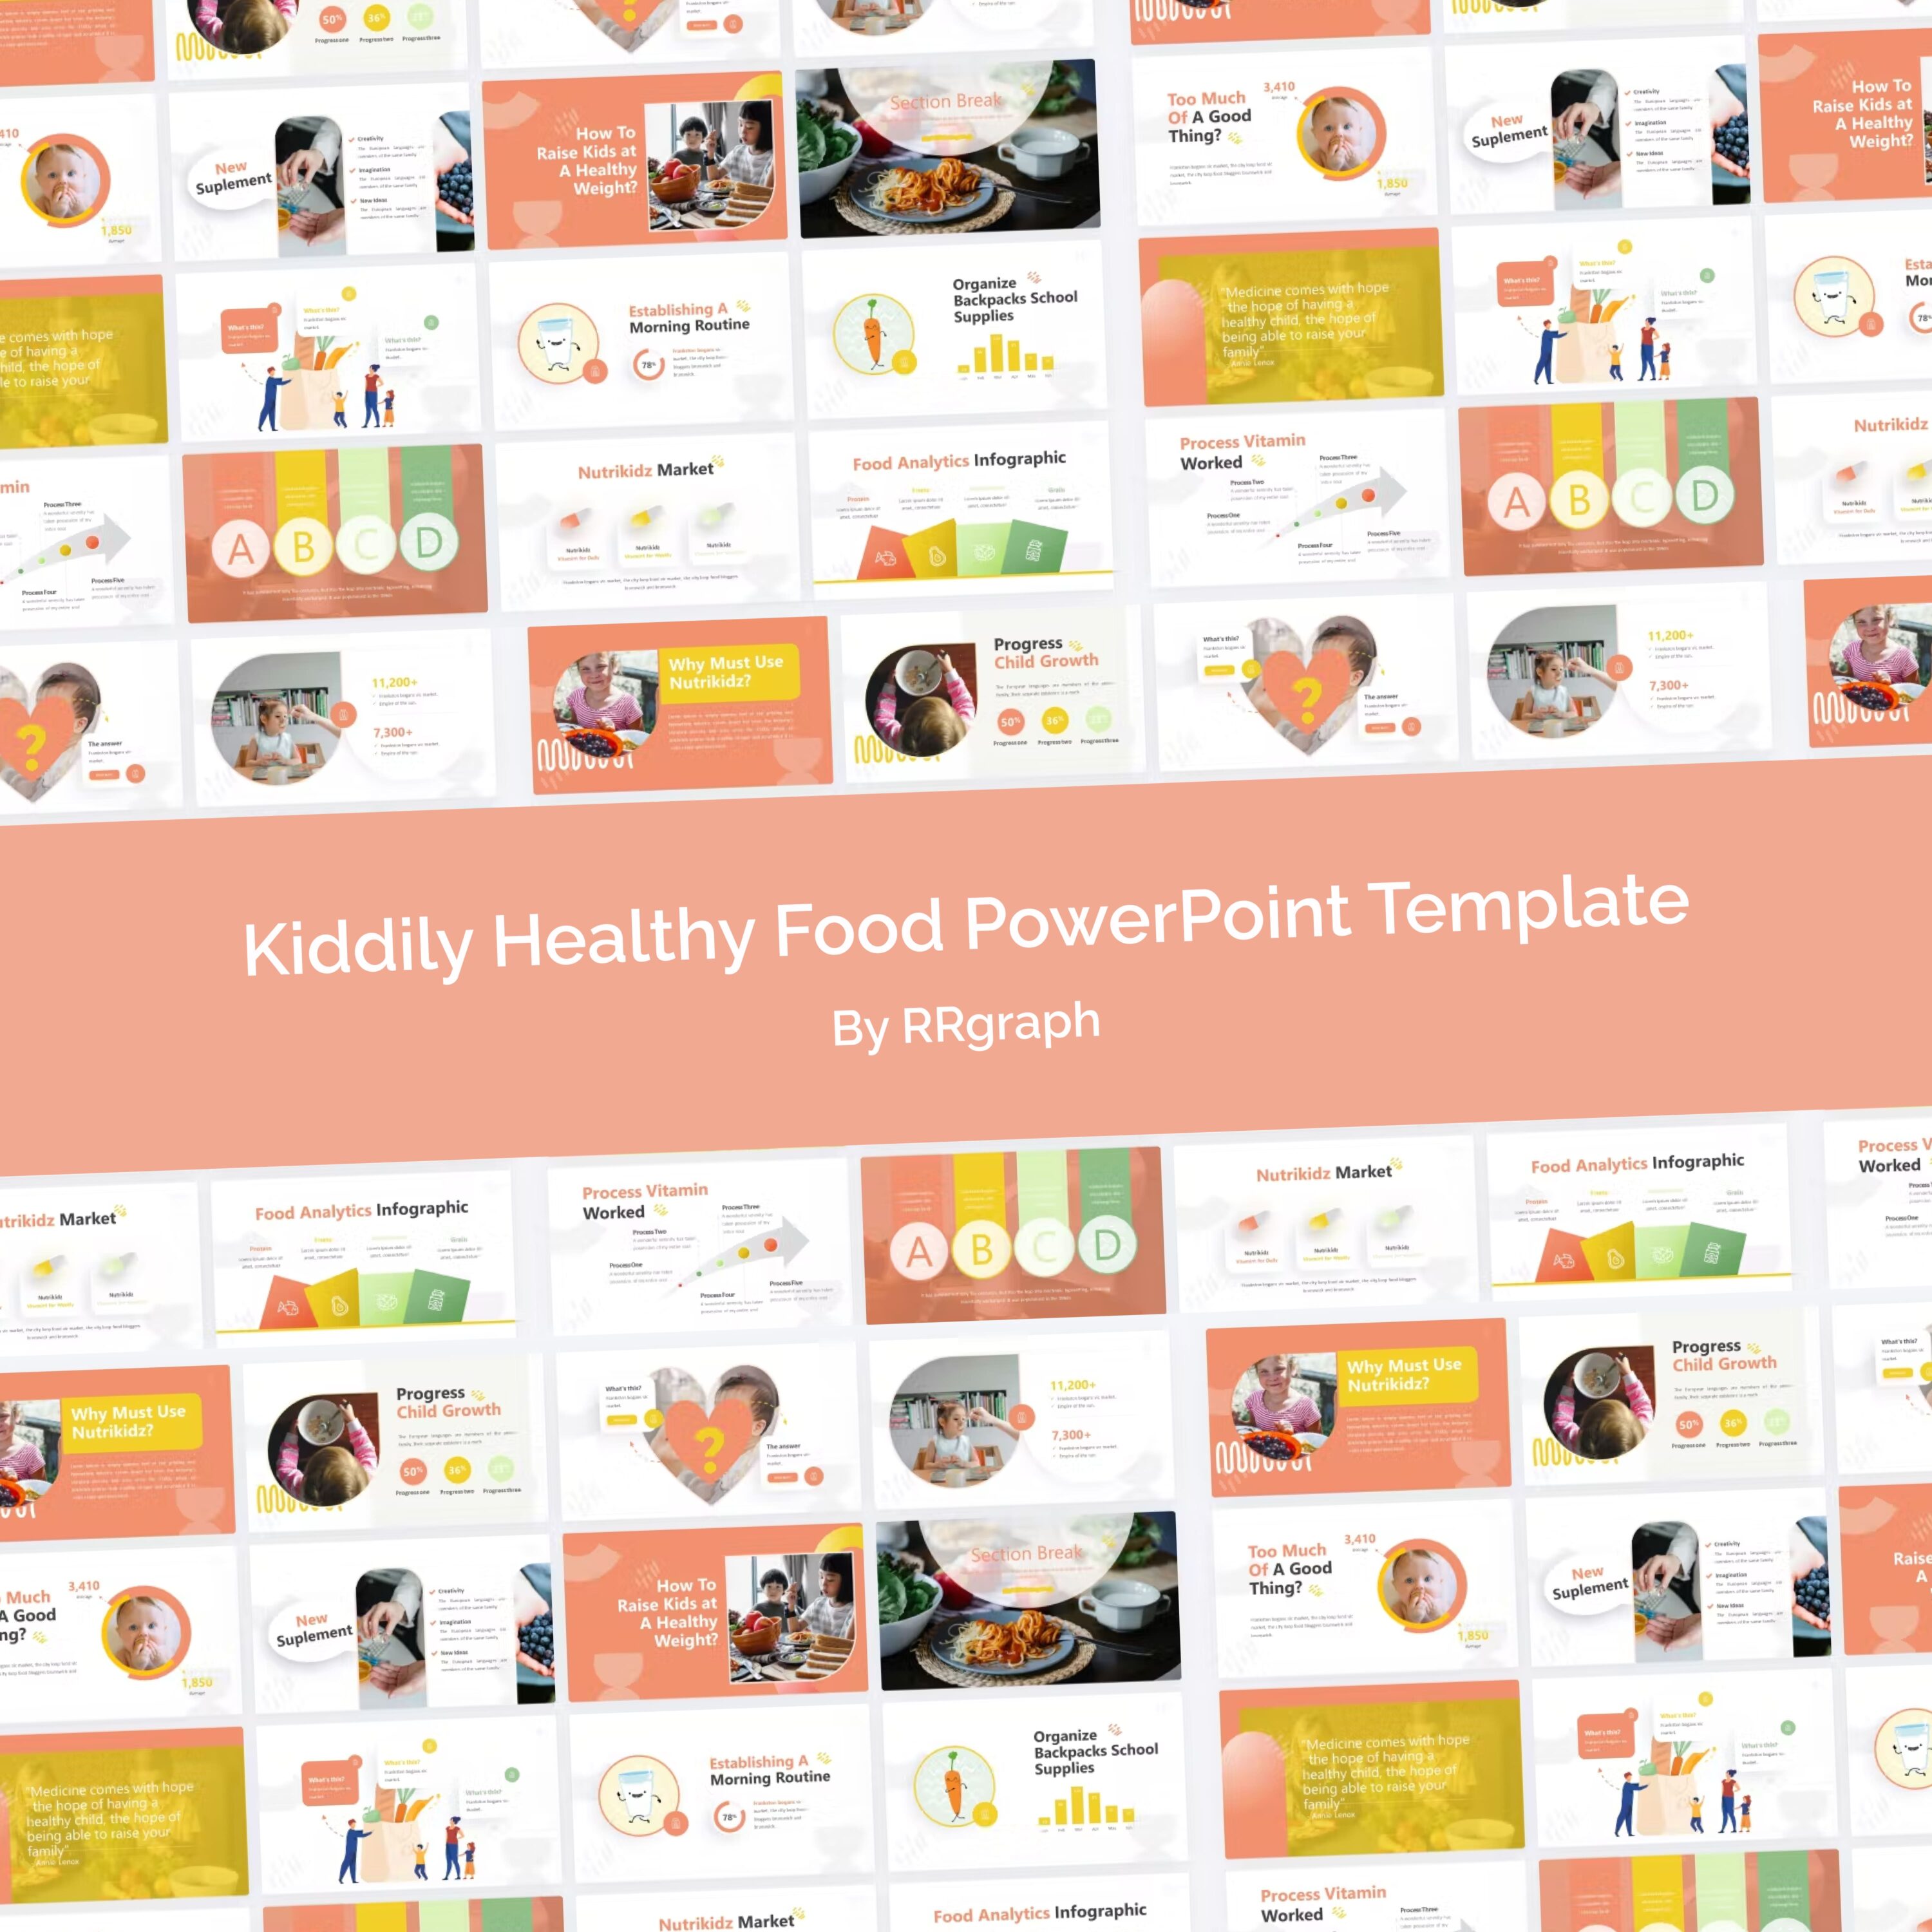 Kiddily Healthy Food PowerPoint Template - main image preview.